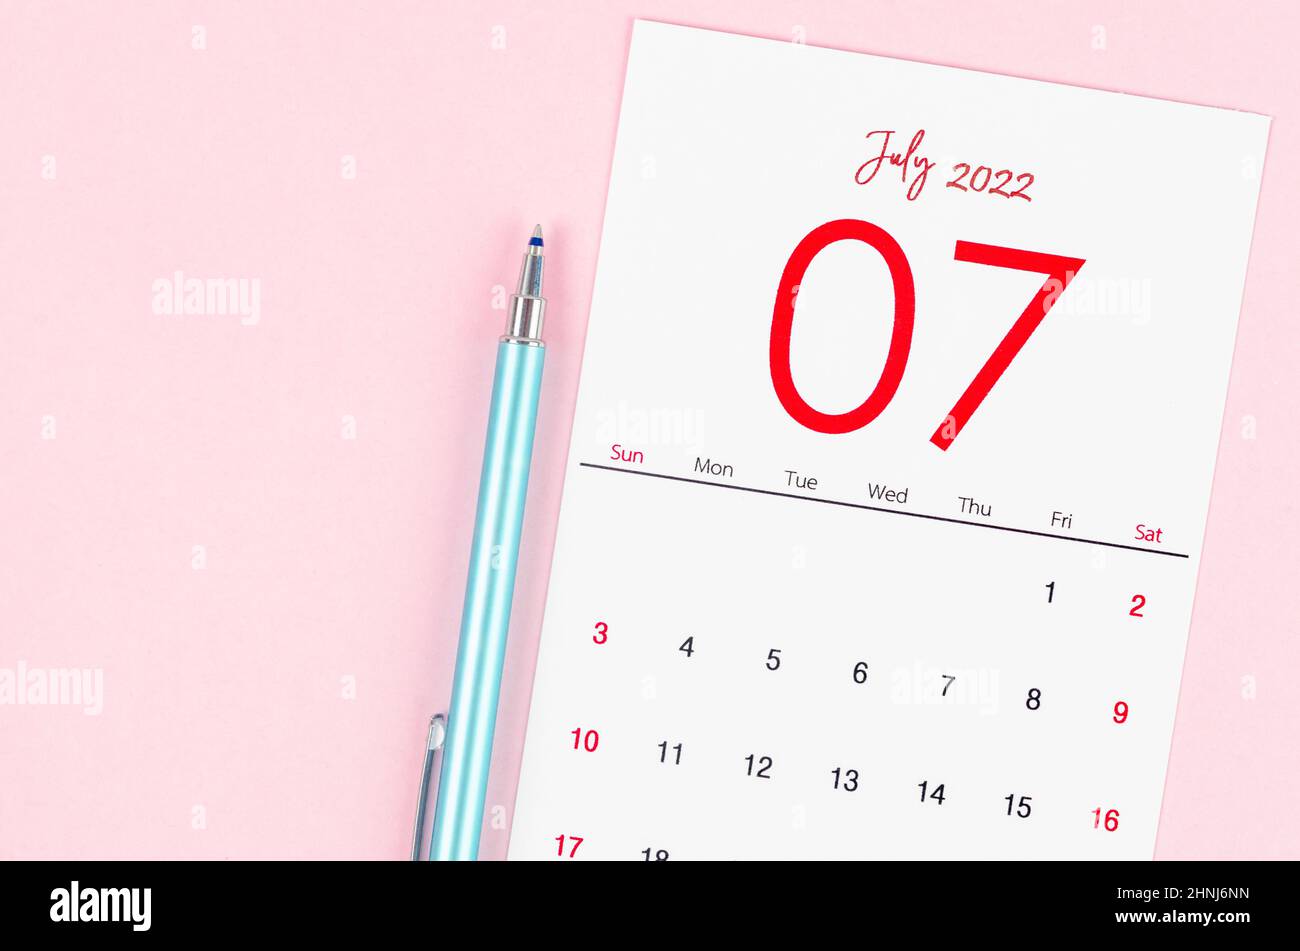 The July 2022 calendar with pen on pink background. Stock Photo